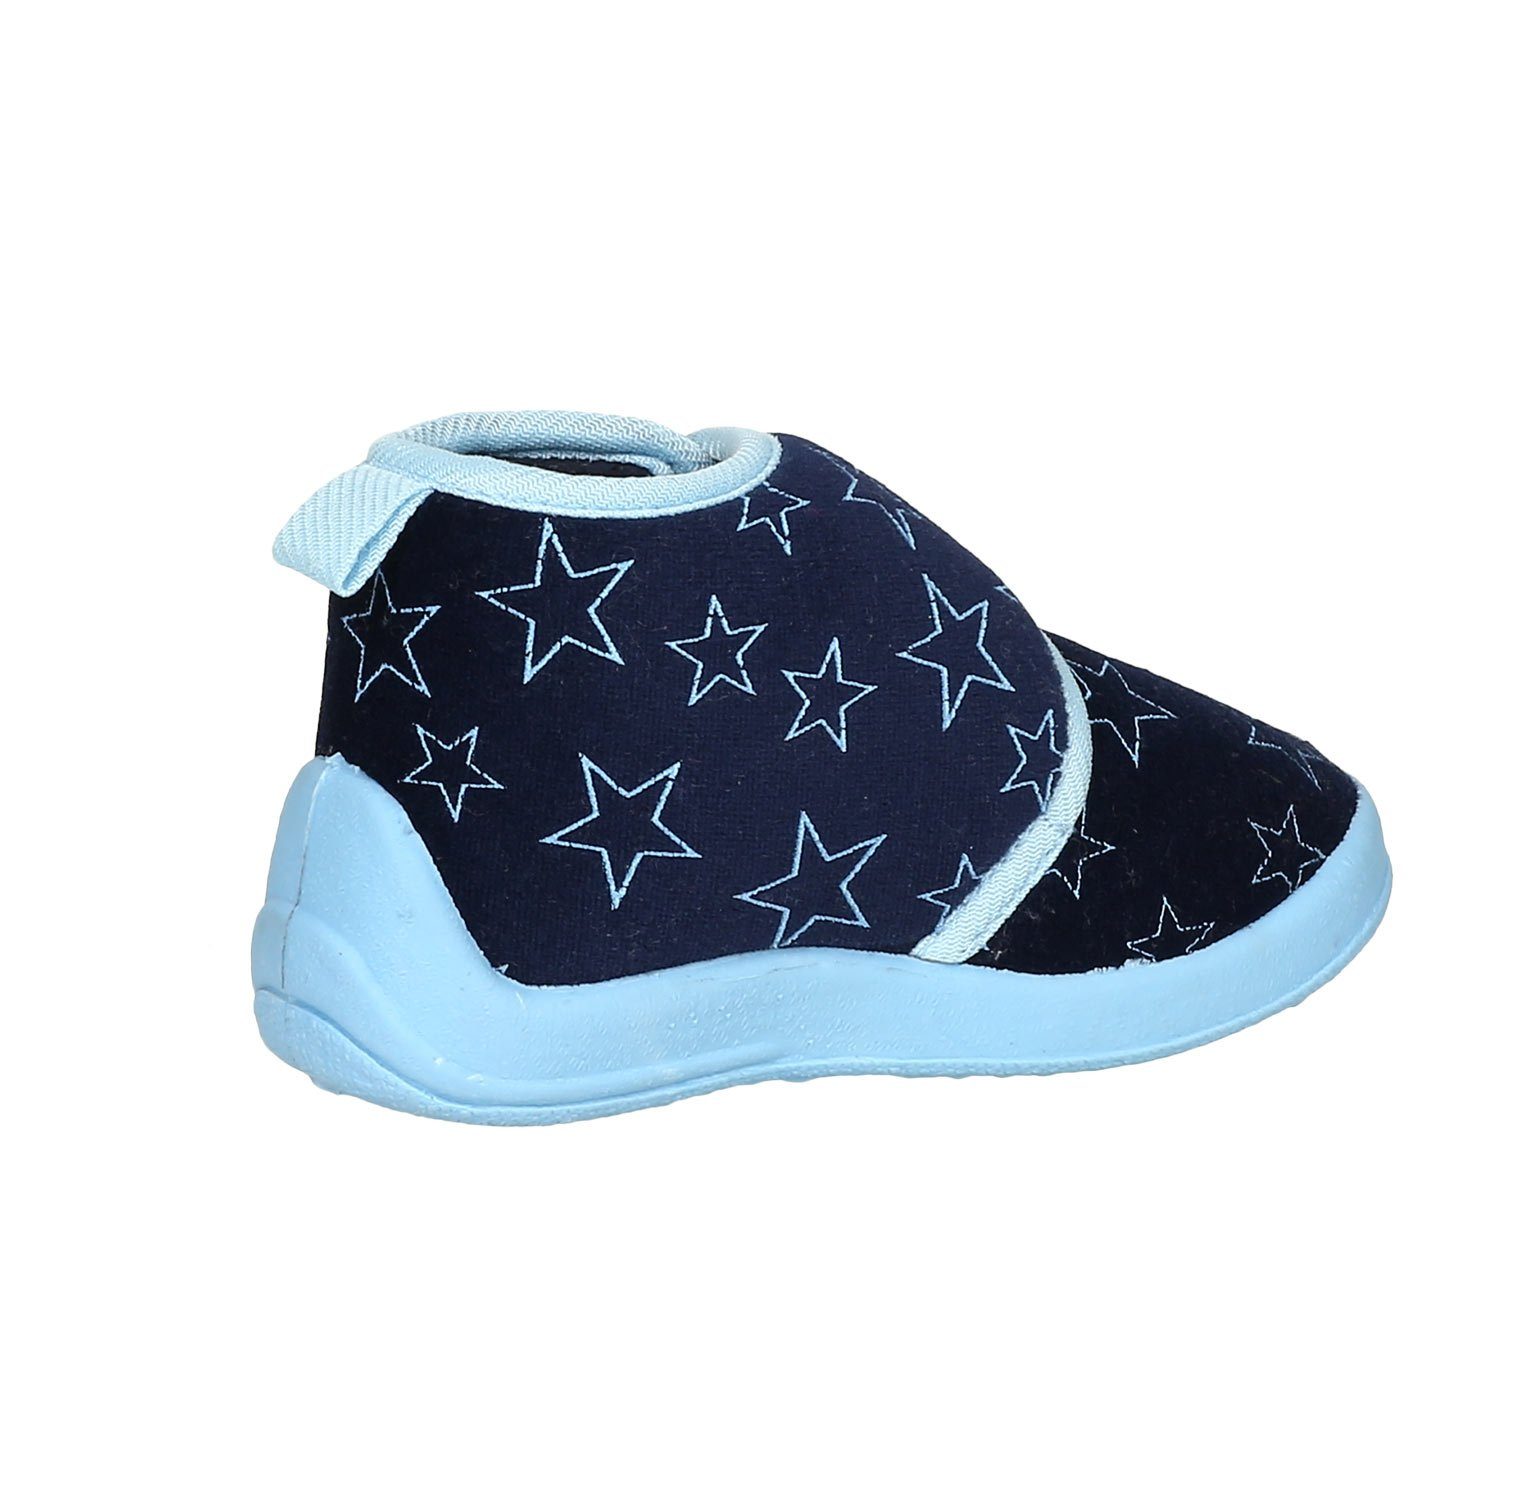 Hausschuh Marine Playshoes Pastell Hausschuh